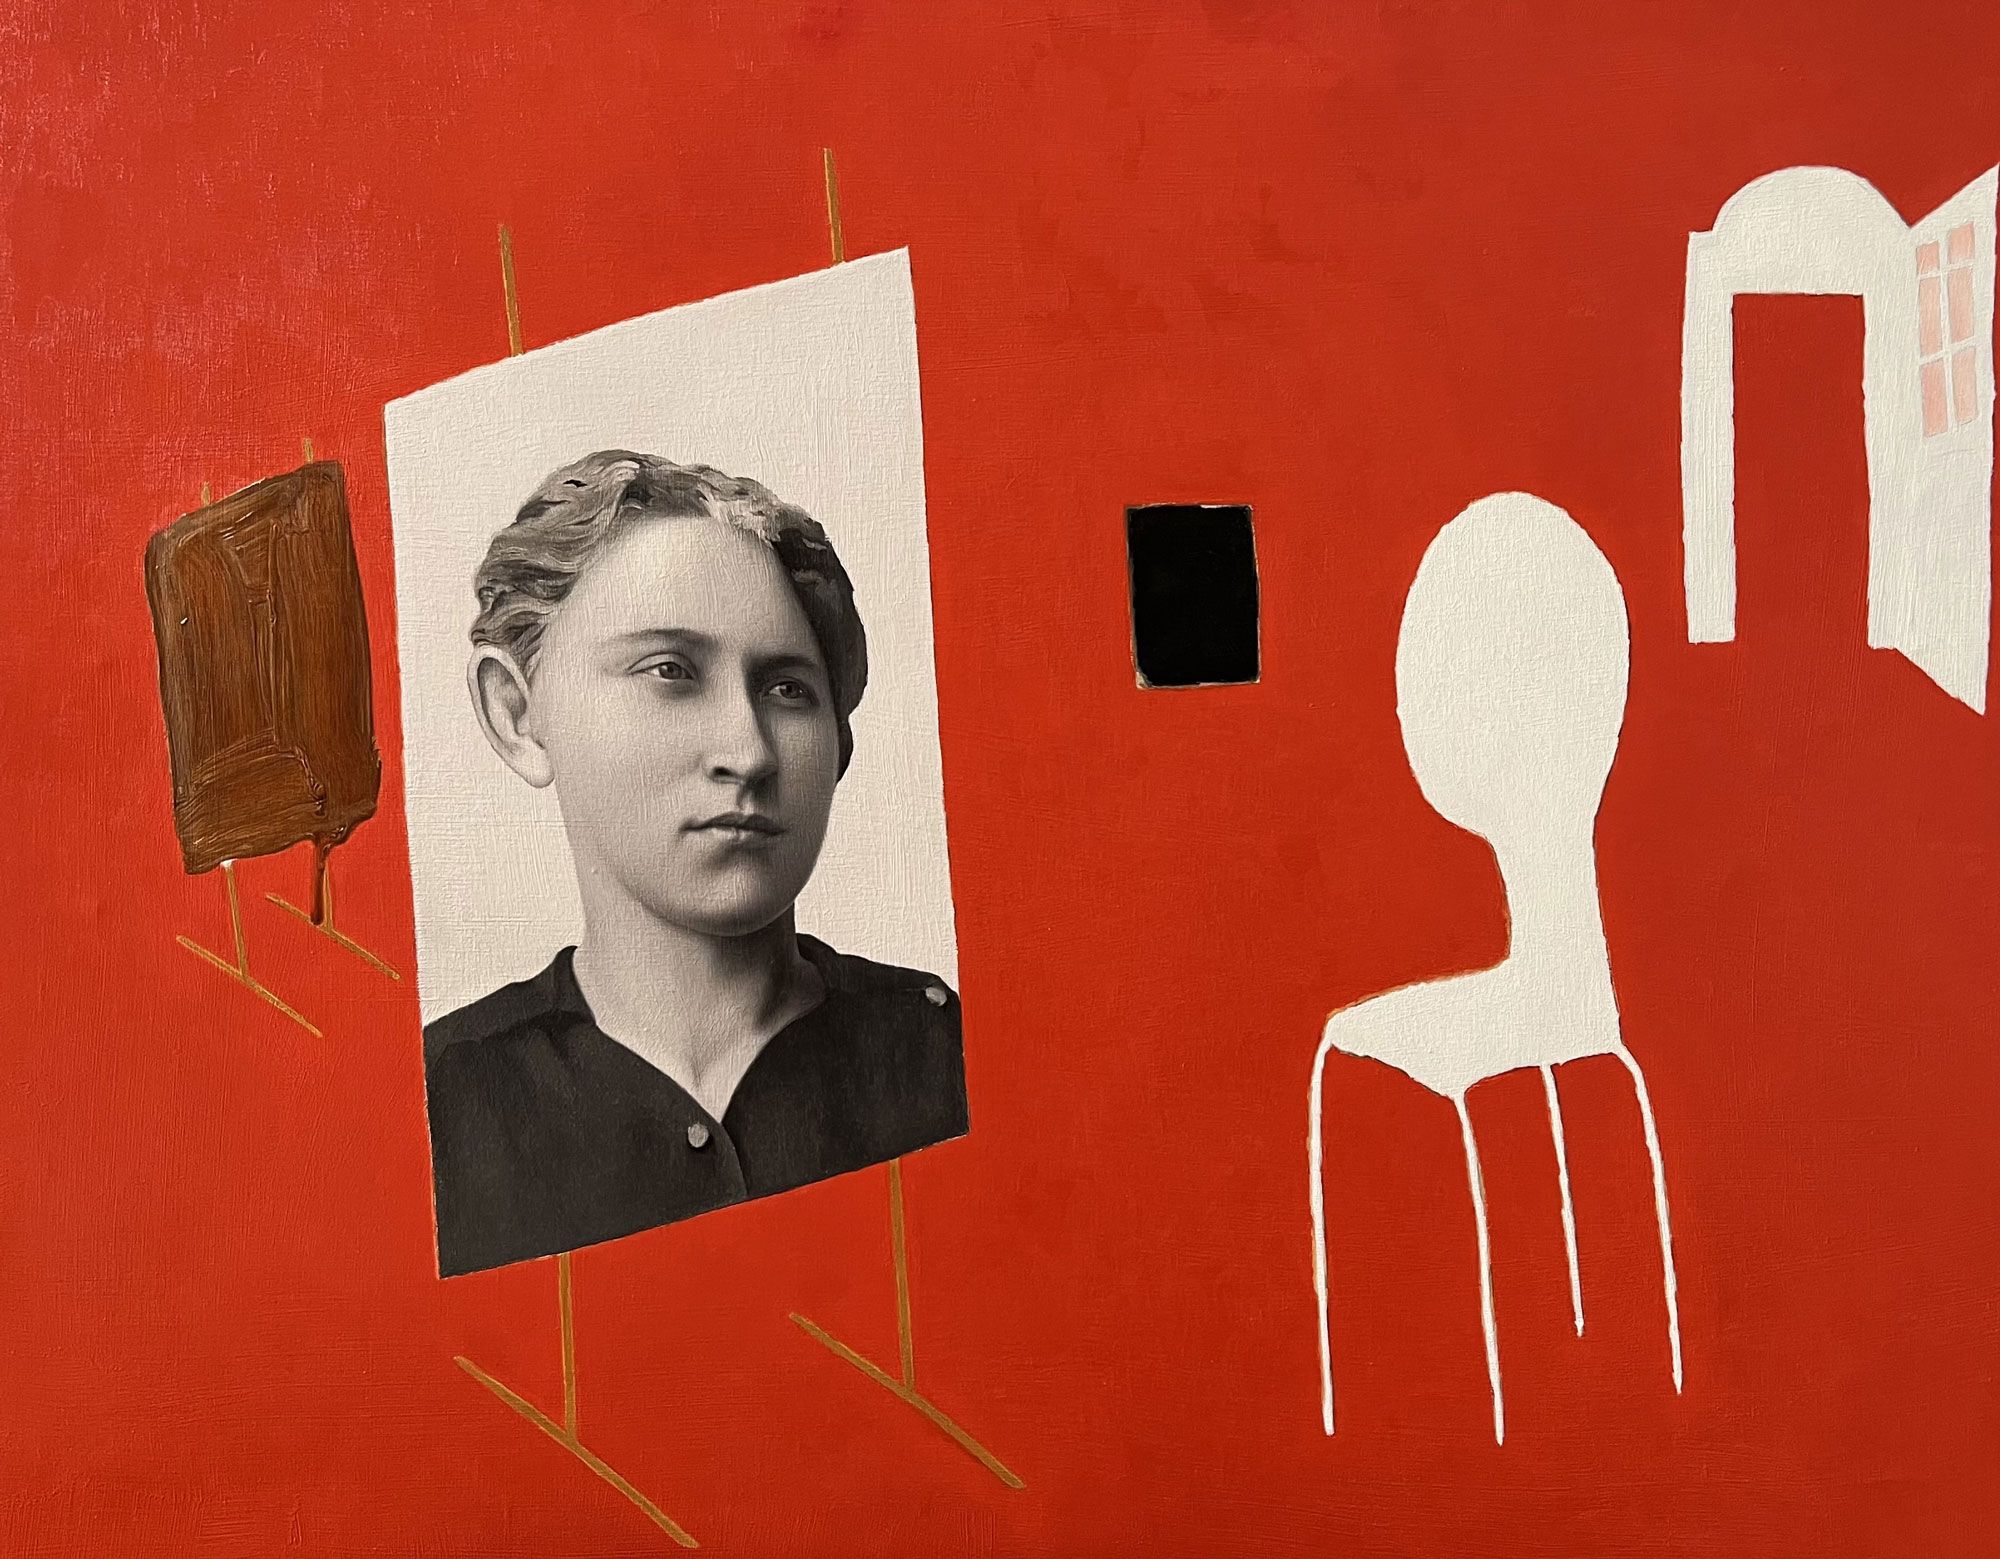 Mark Alexander's oil on canvas: vivid red background with monochrome female portrait, abstract shapes.